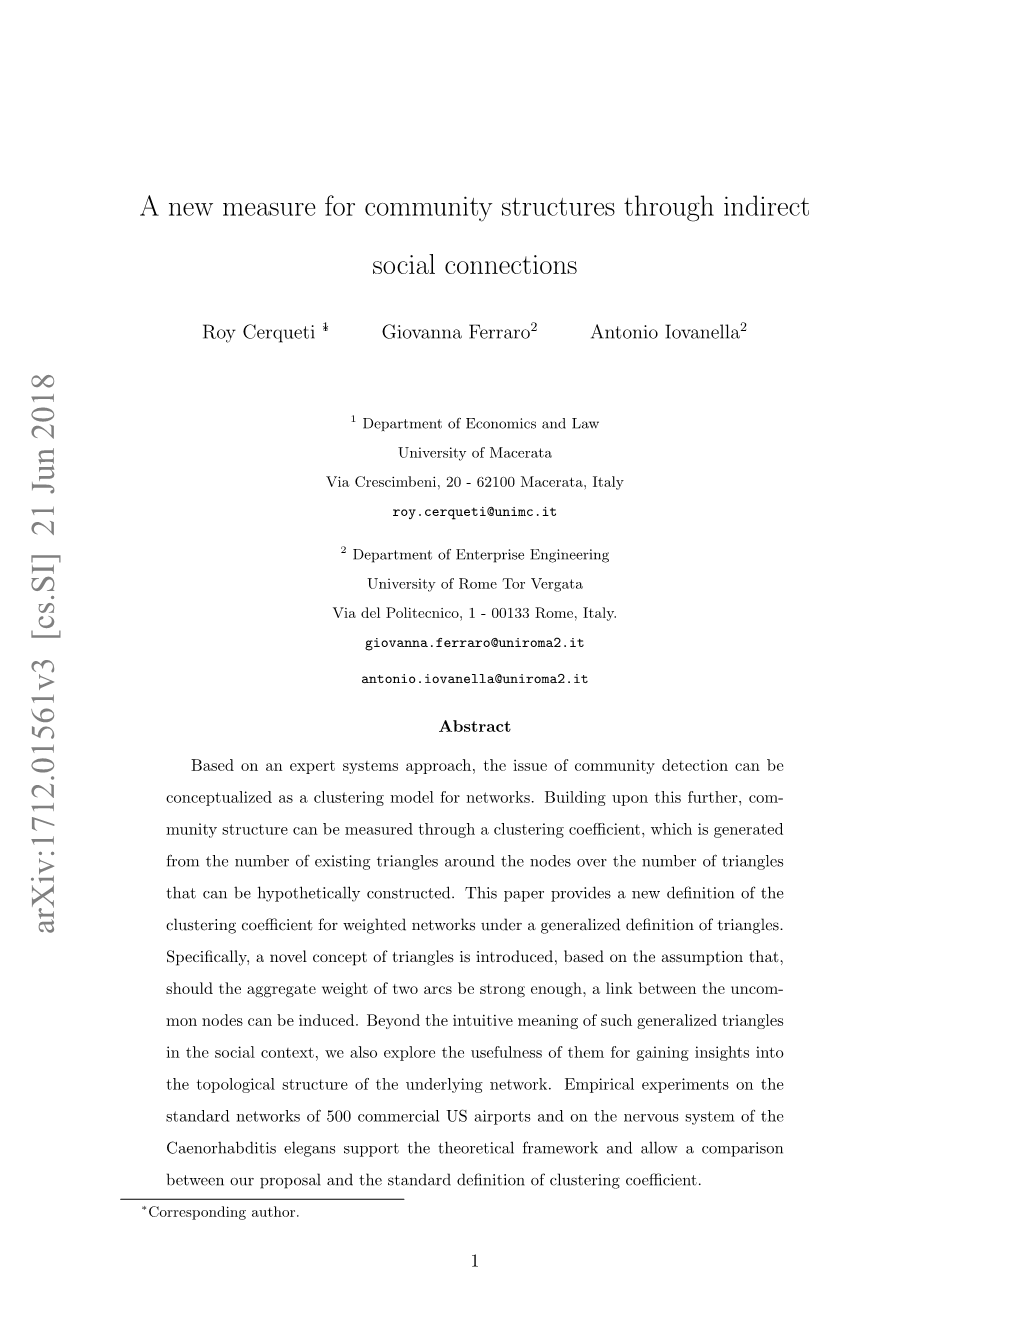 A New Measure for Community Structures Through Indirect Social